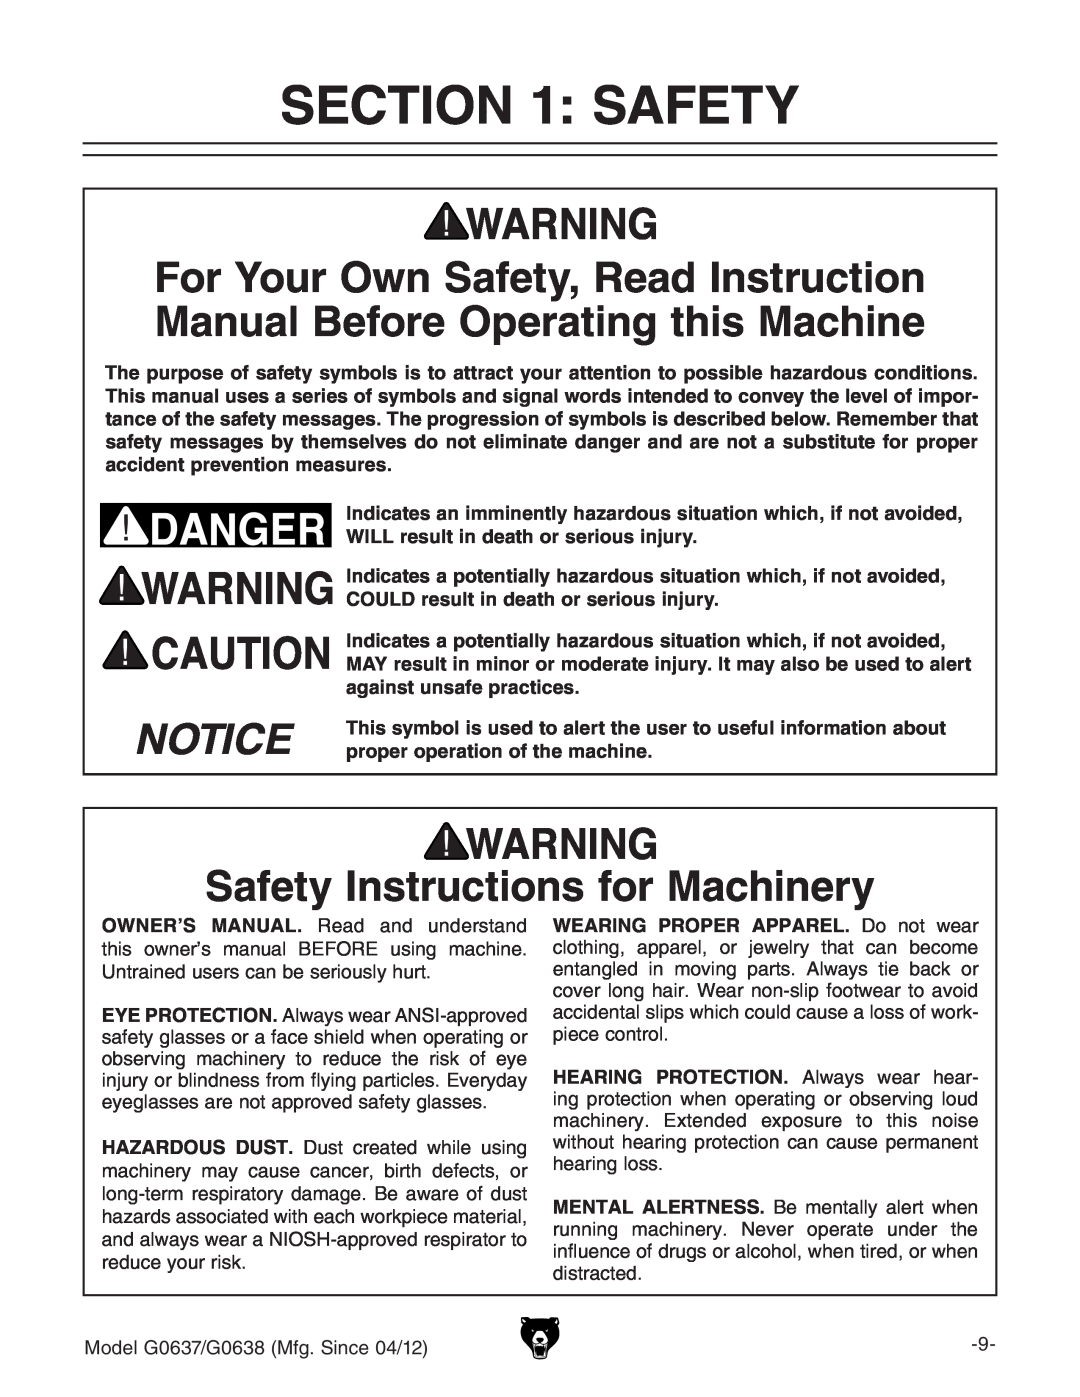 Grizzly G0637 owner manual Notice, Safety Instructions for Machinery, WILL result in death or serious injury 